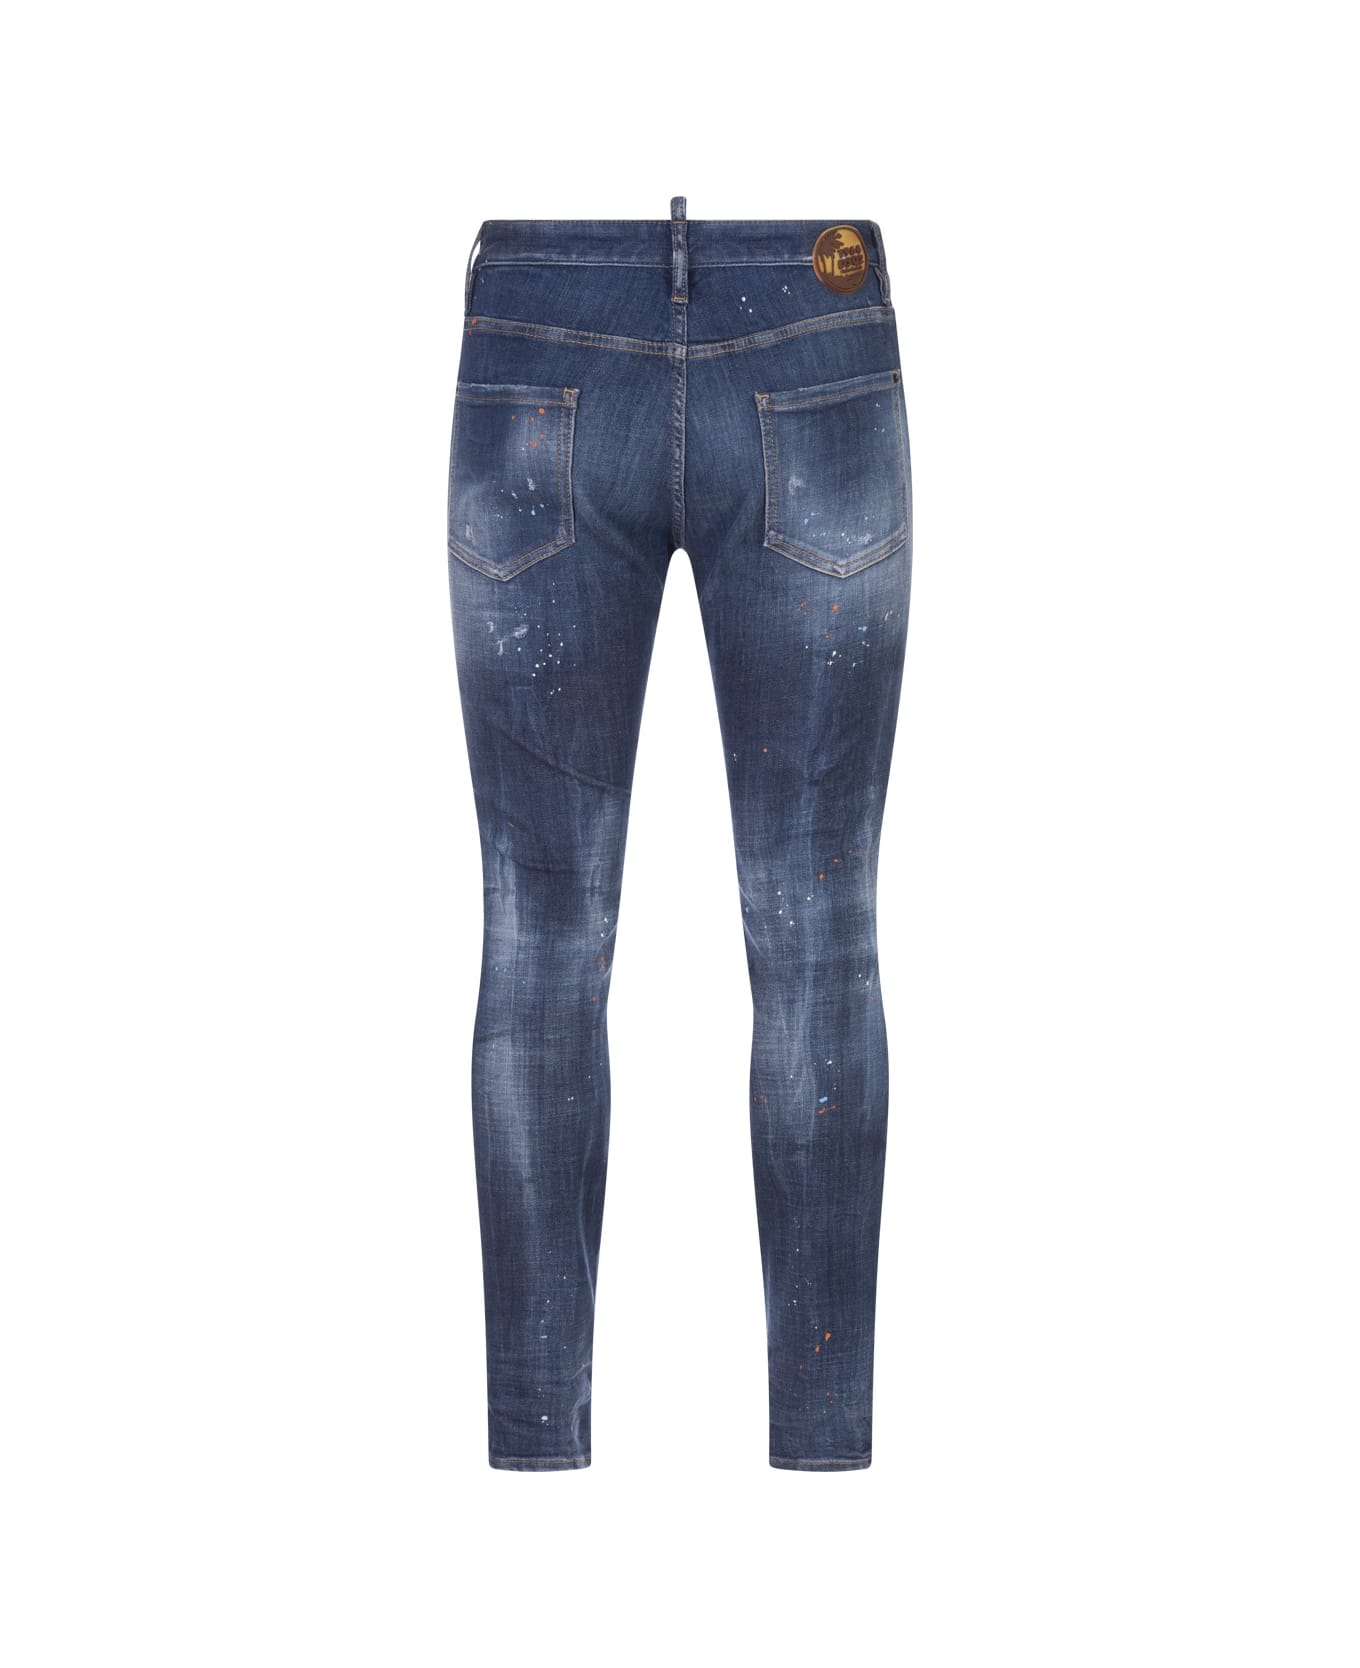 Dsquared2 Medium Coral Springs Wash Super Twinky Jeans - Blue